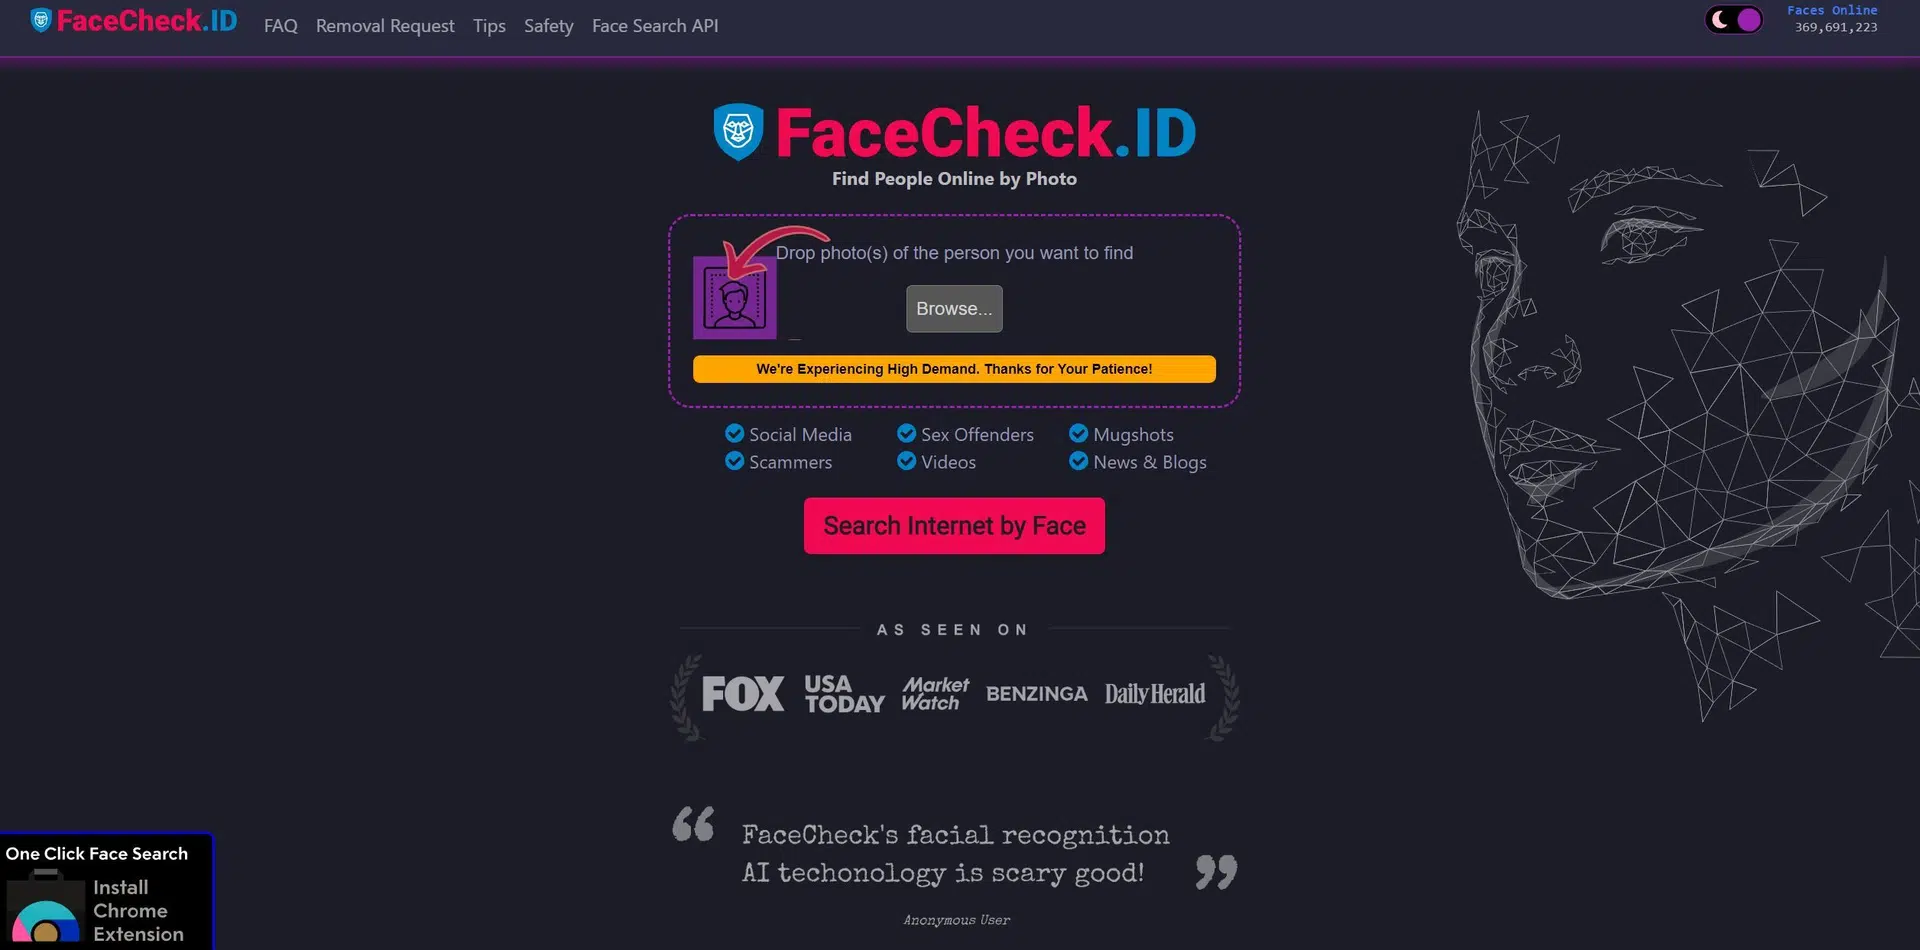 FaceCheck IDwebsite picture